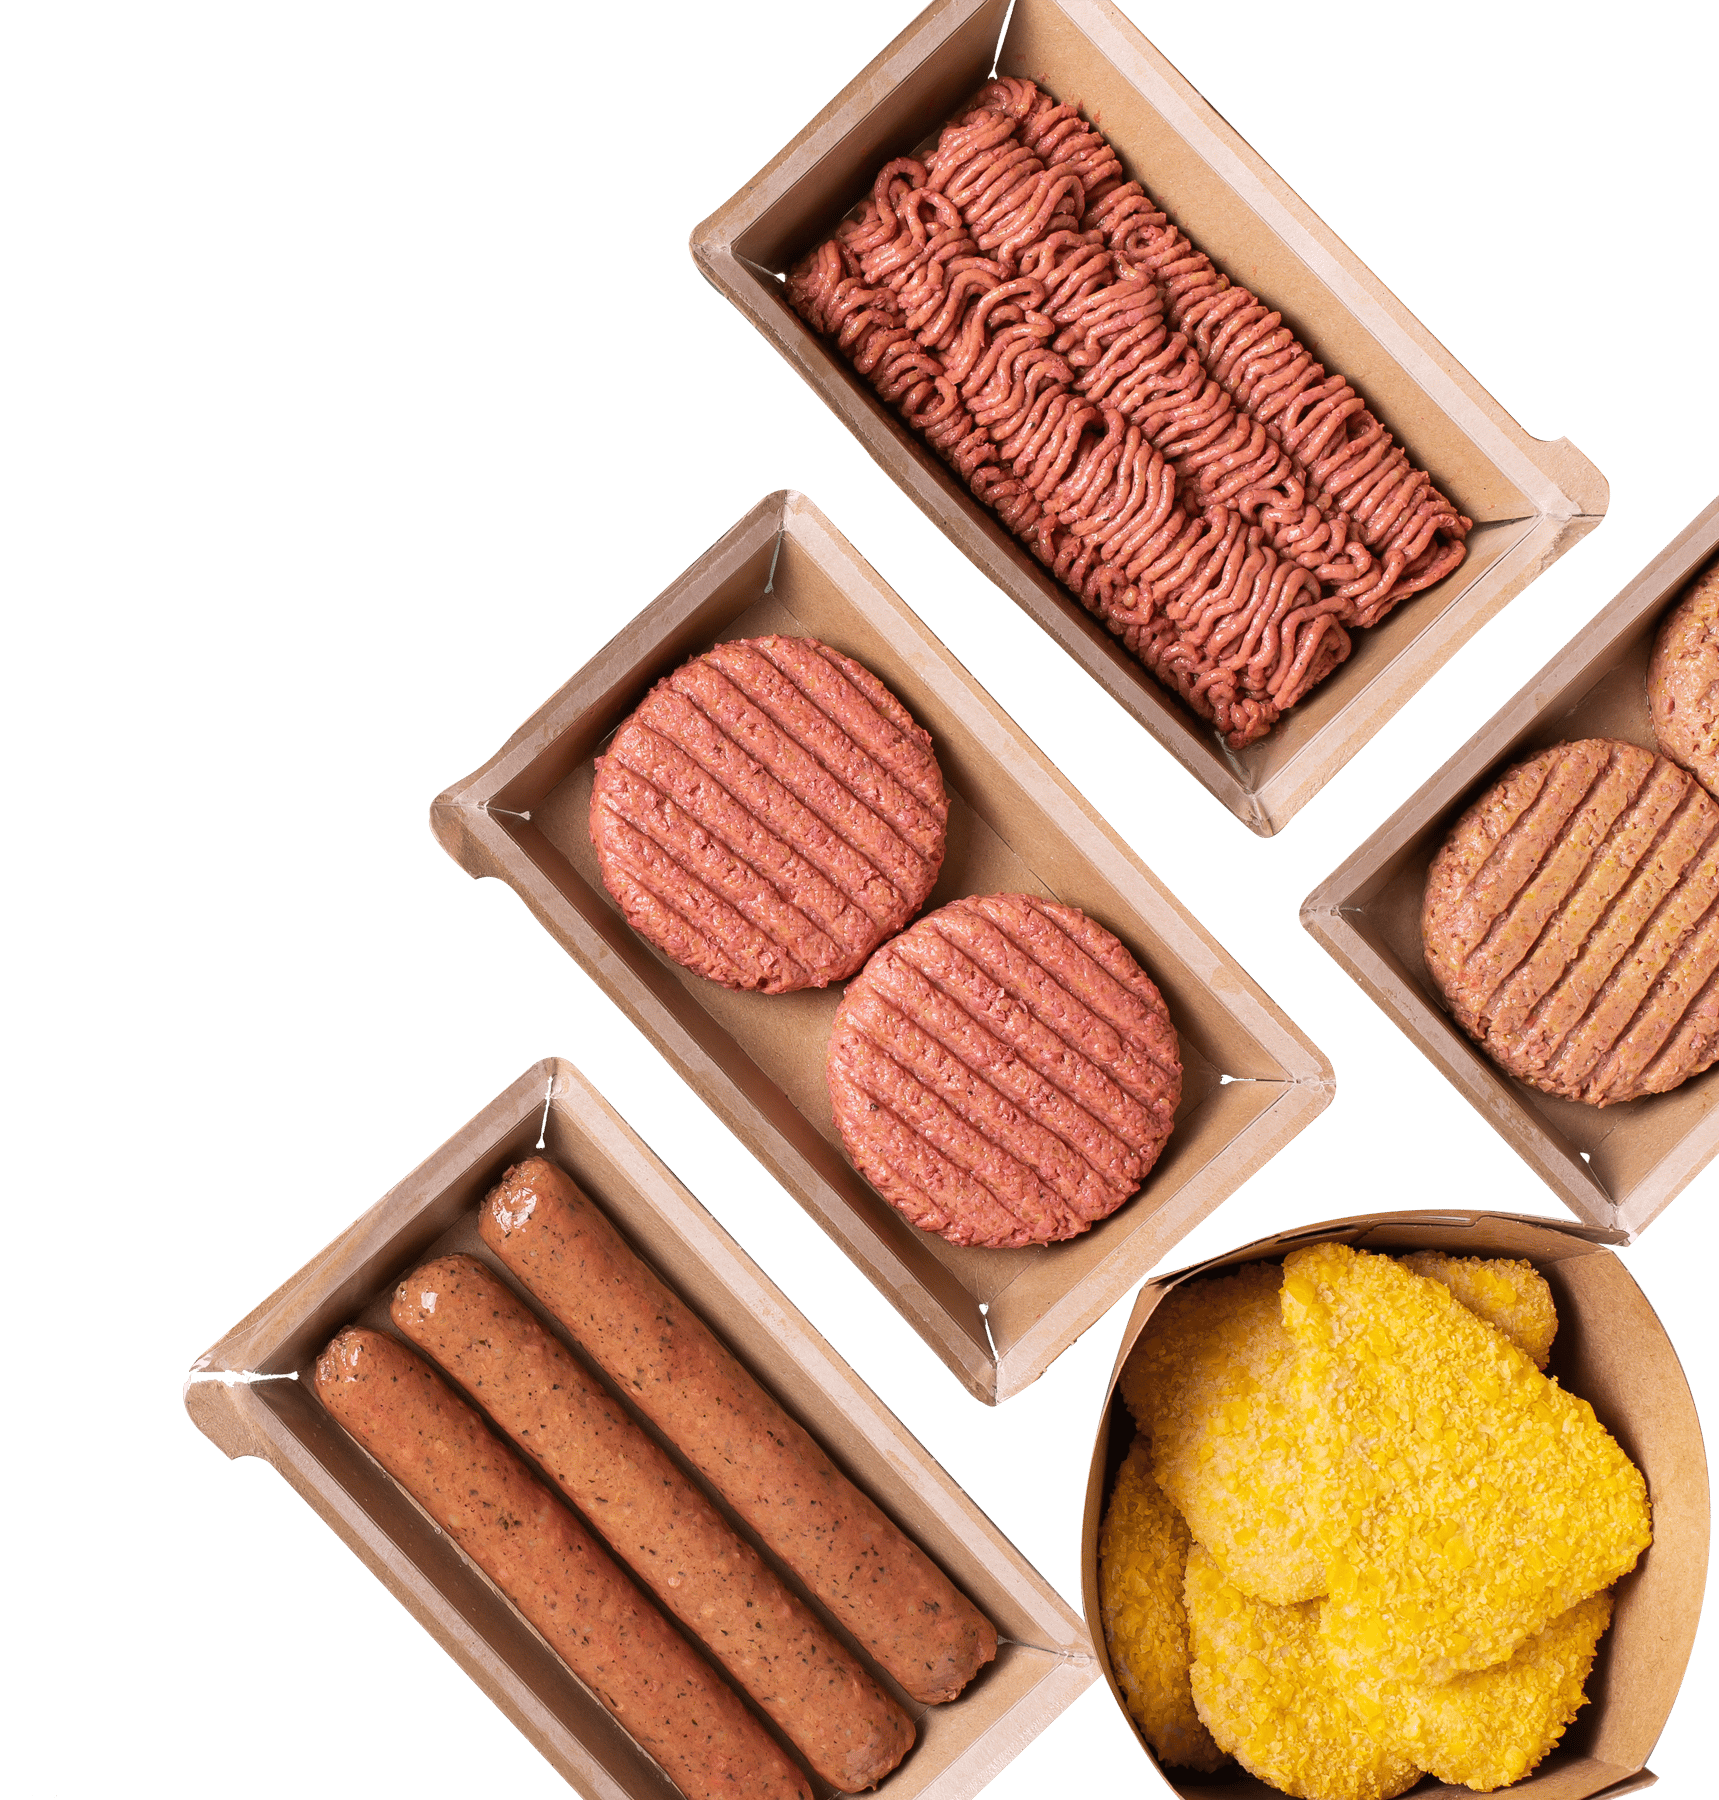 Display of plant-based meat products in cardboard serving boxes